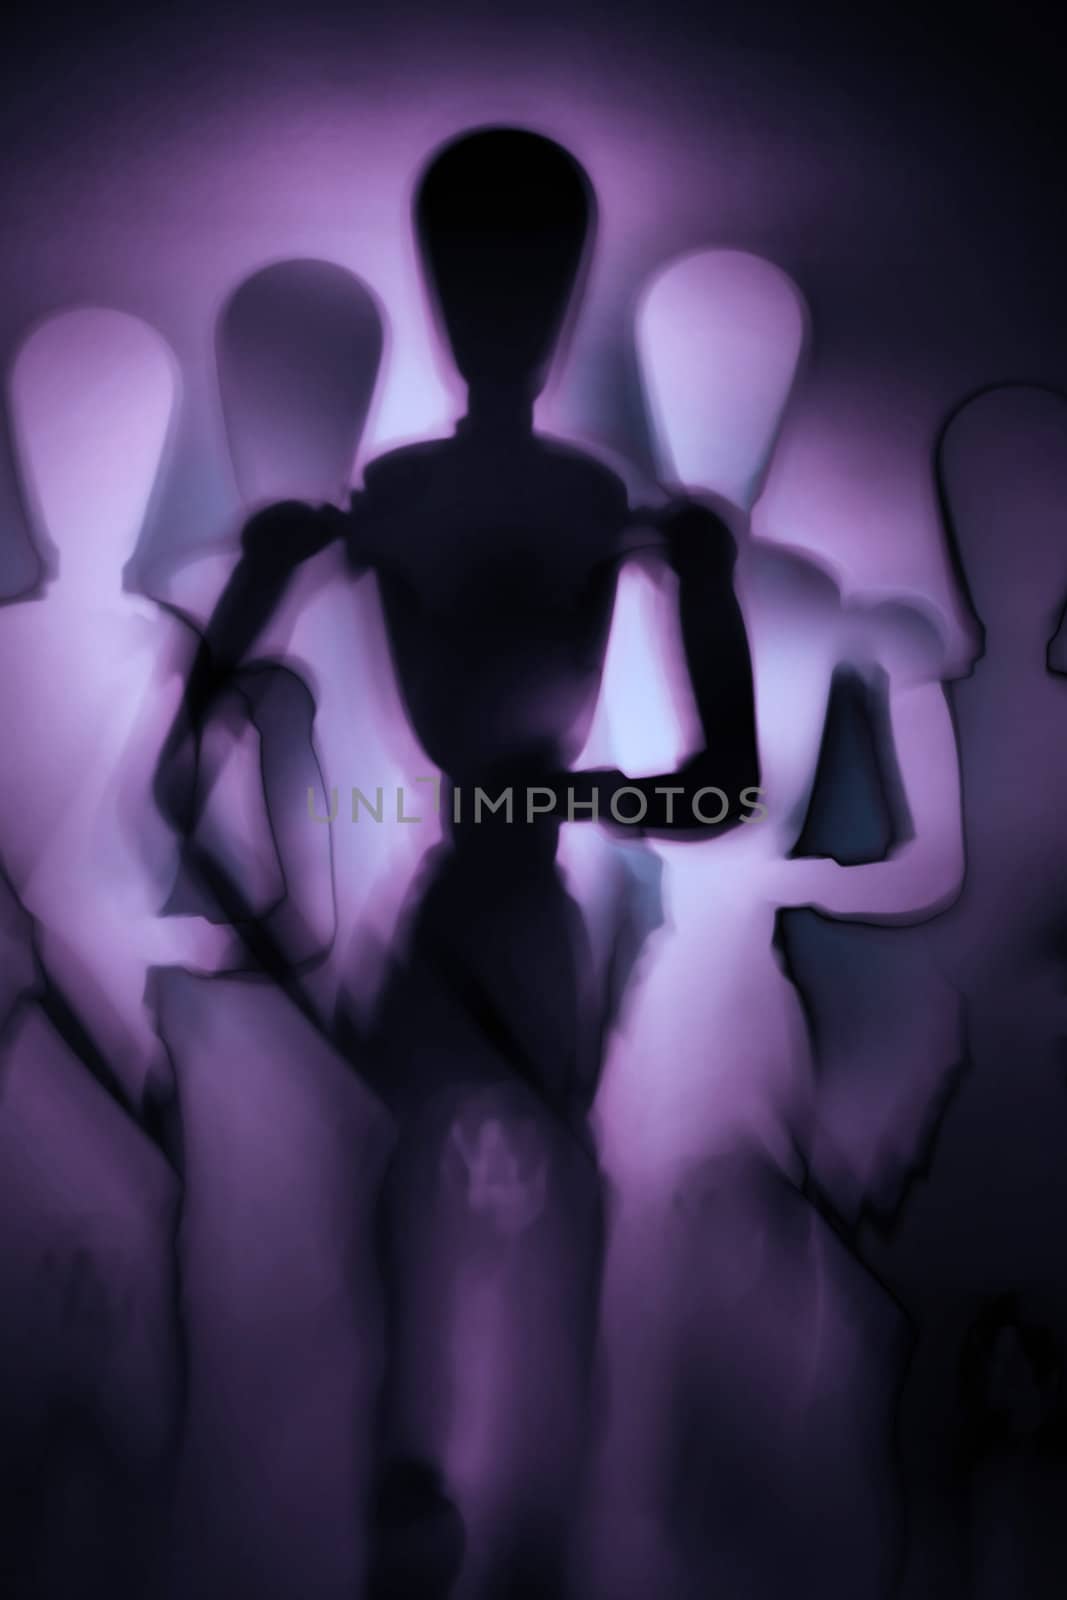 blurry silhouette of a figure in motion